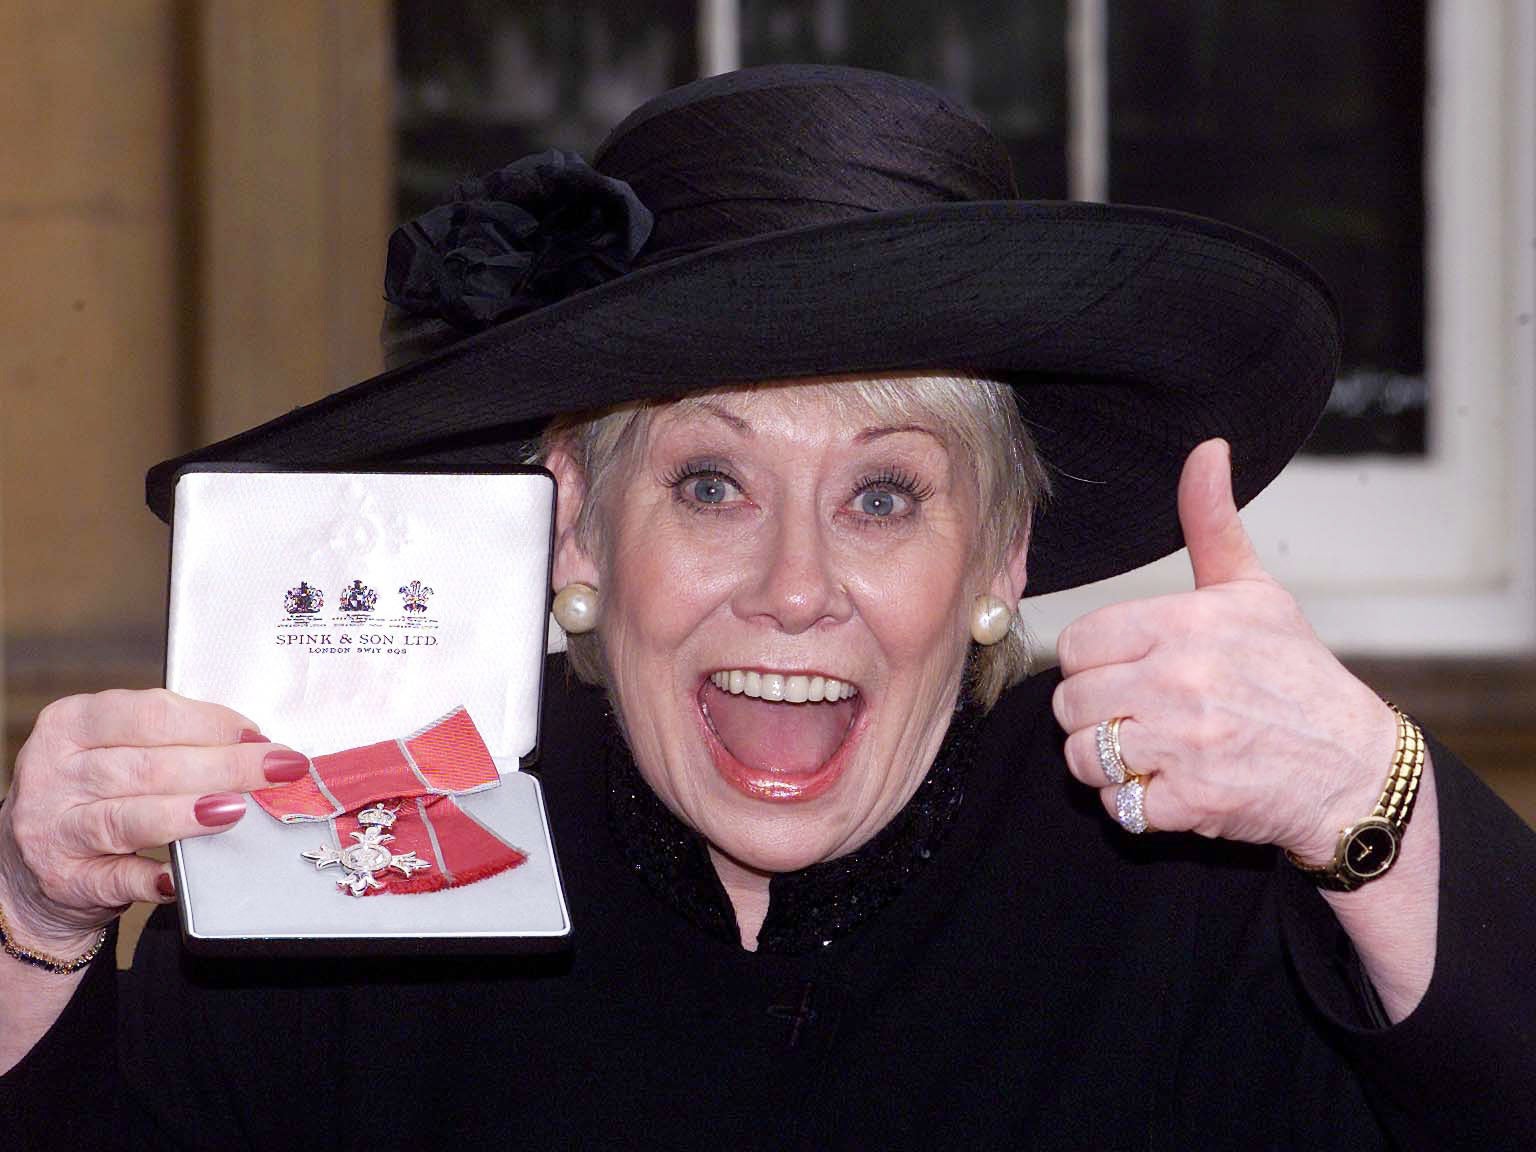 Dawn was awarded an MBE in 2000